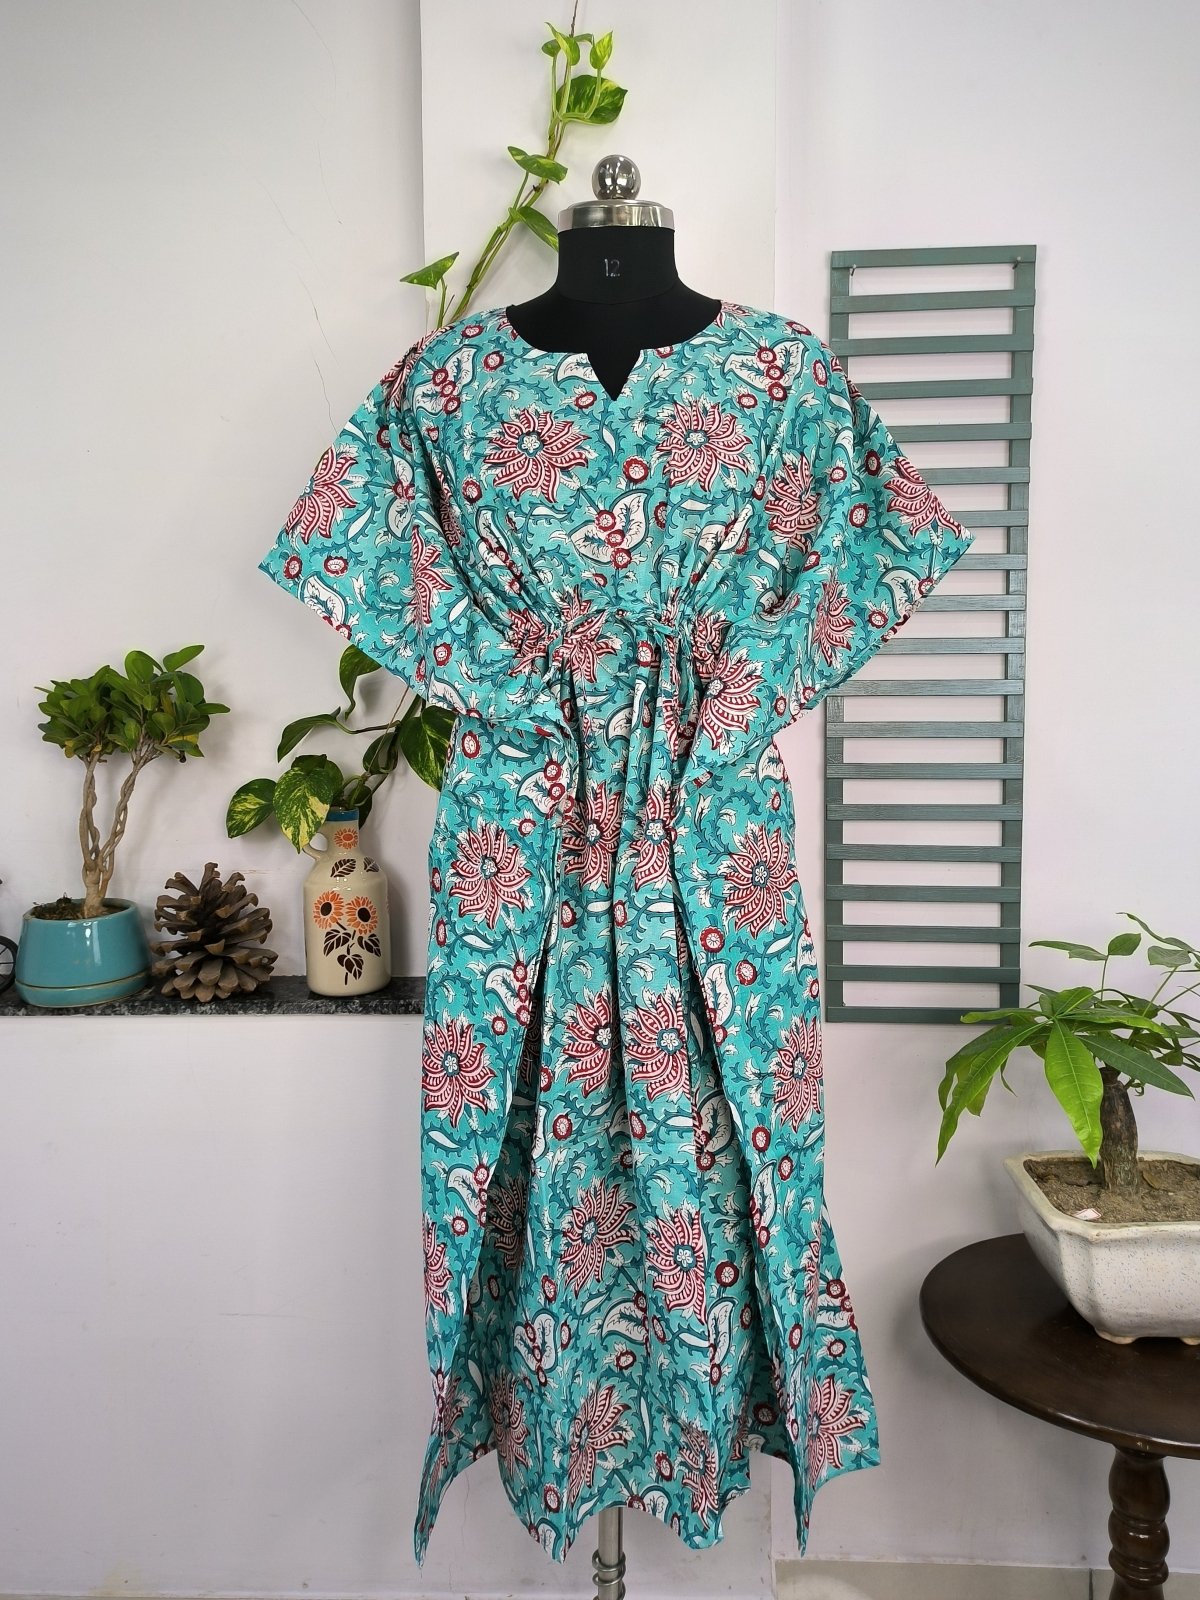 Boho Style Kaftan Dress | Indian Handprinted with Monte Carlo Lotus Bloom | Breathable Lightweight Cotton Fabric, Comfortable, Chic Summer Look - The Eastern Loom